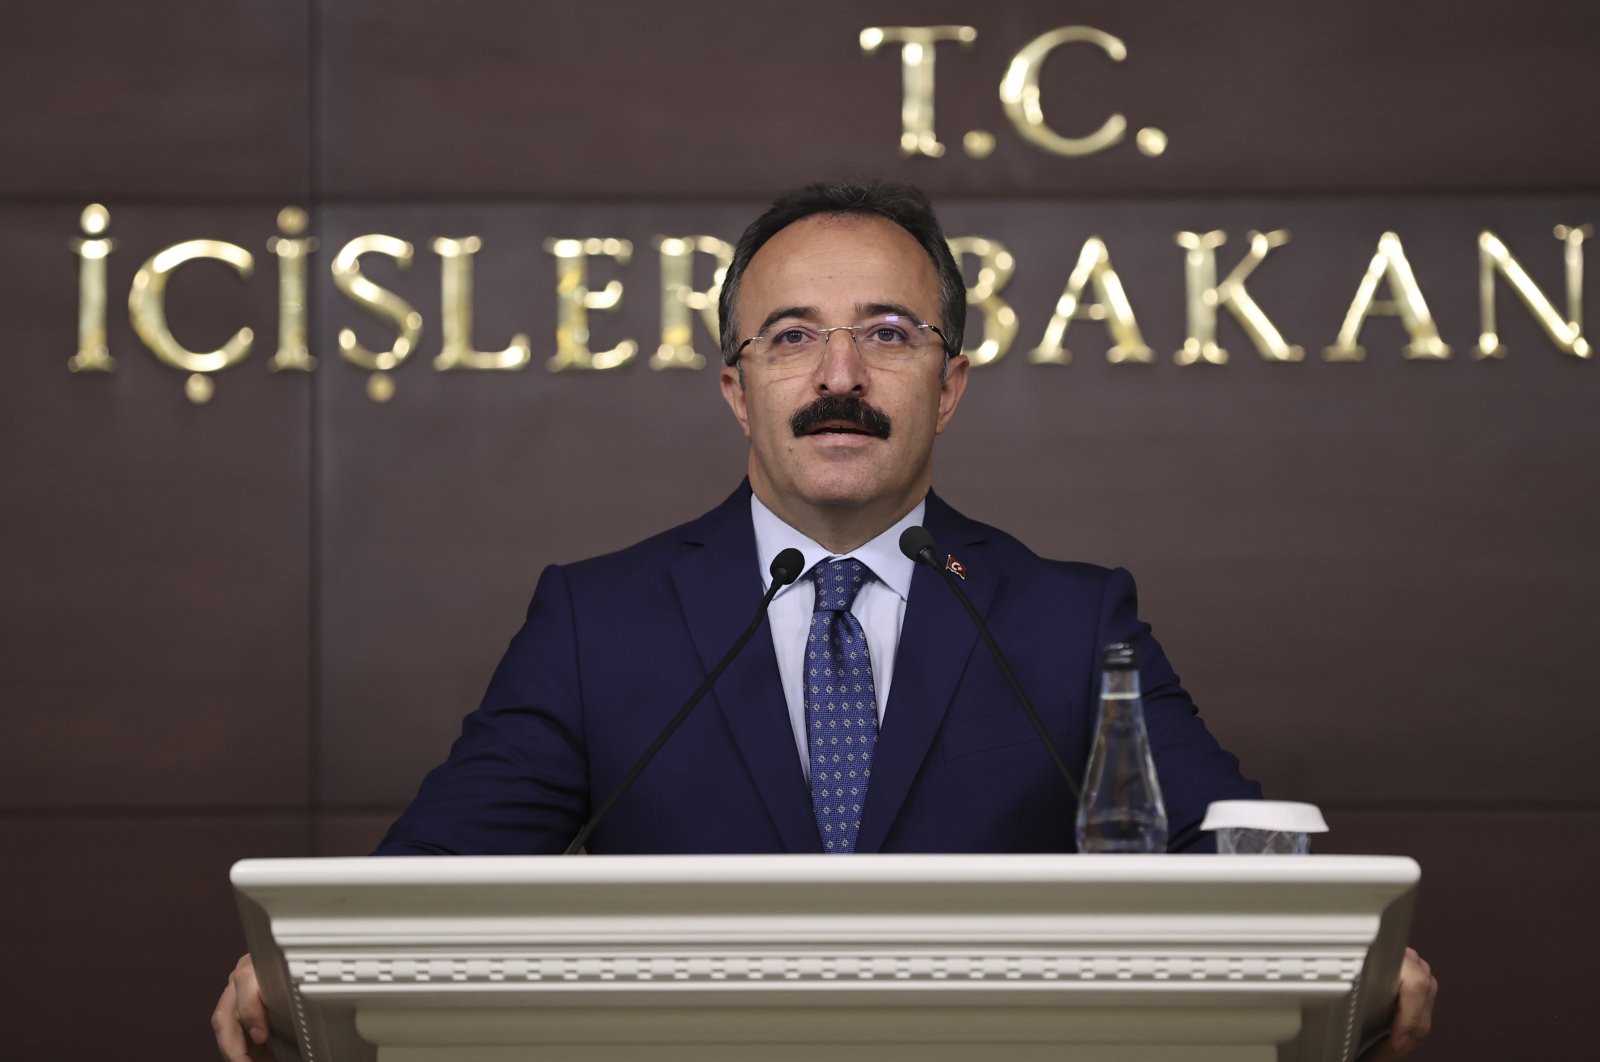 Deputy Interior Minister Ismail Çataklı speaks at a monthly ministry briefing in the capital Ankara, Turkey, Nov. 3, 2021. (AA Photo)